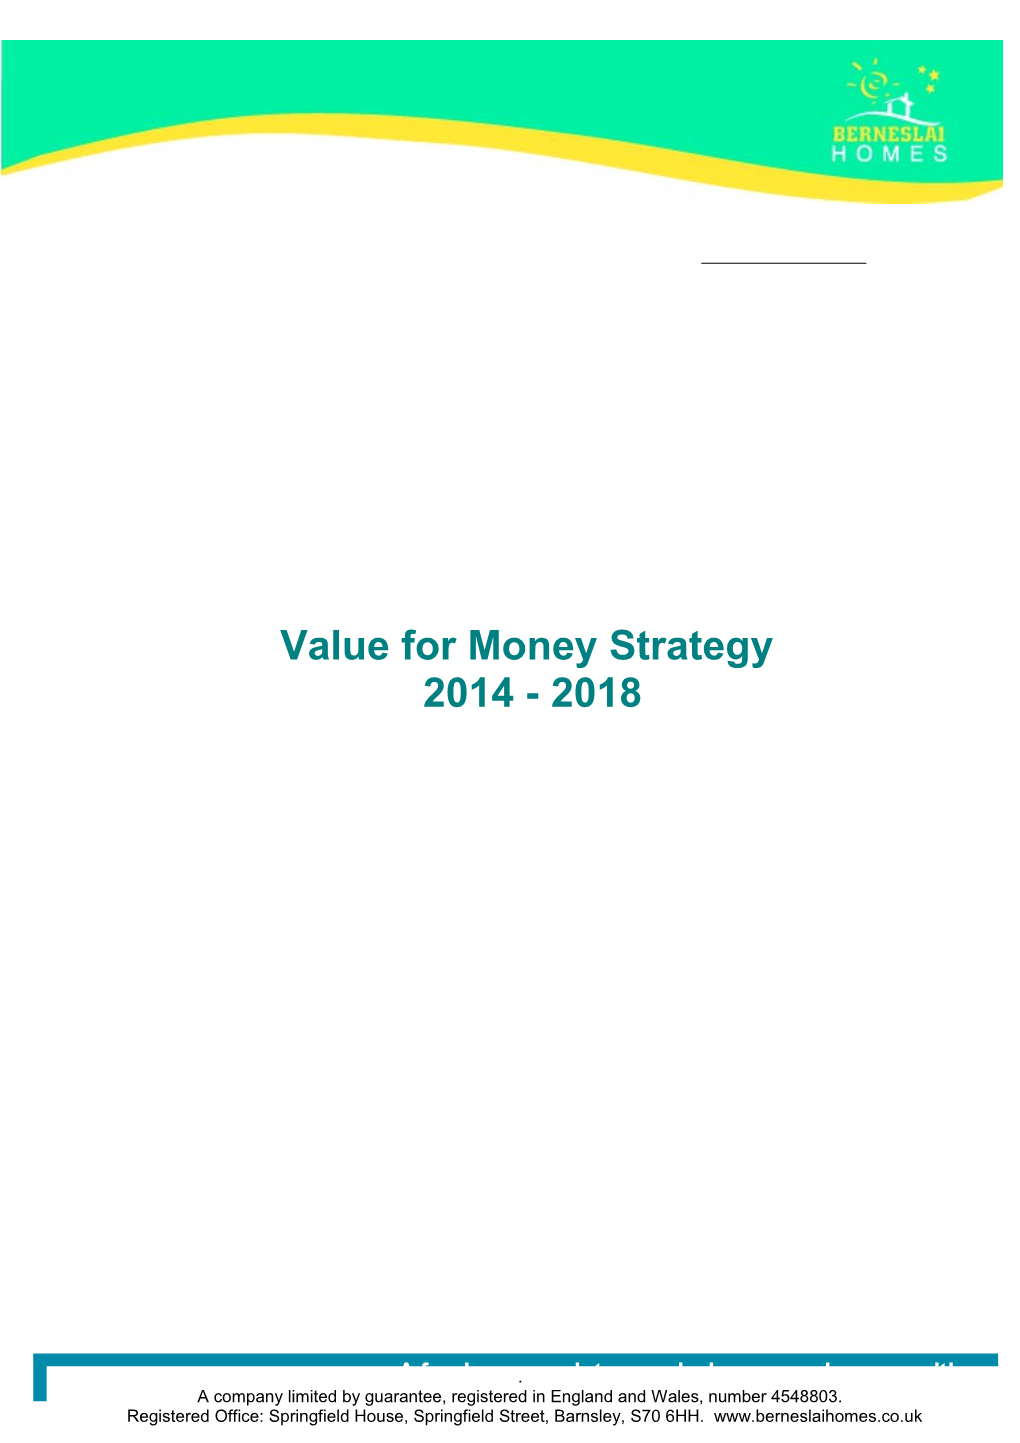 Why Have a Value for Money Strategy?